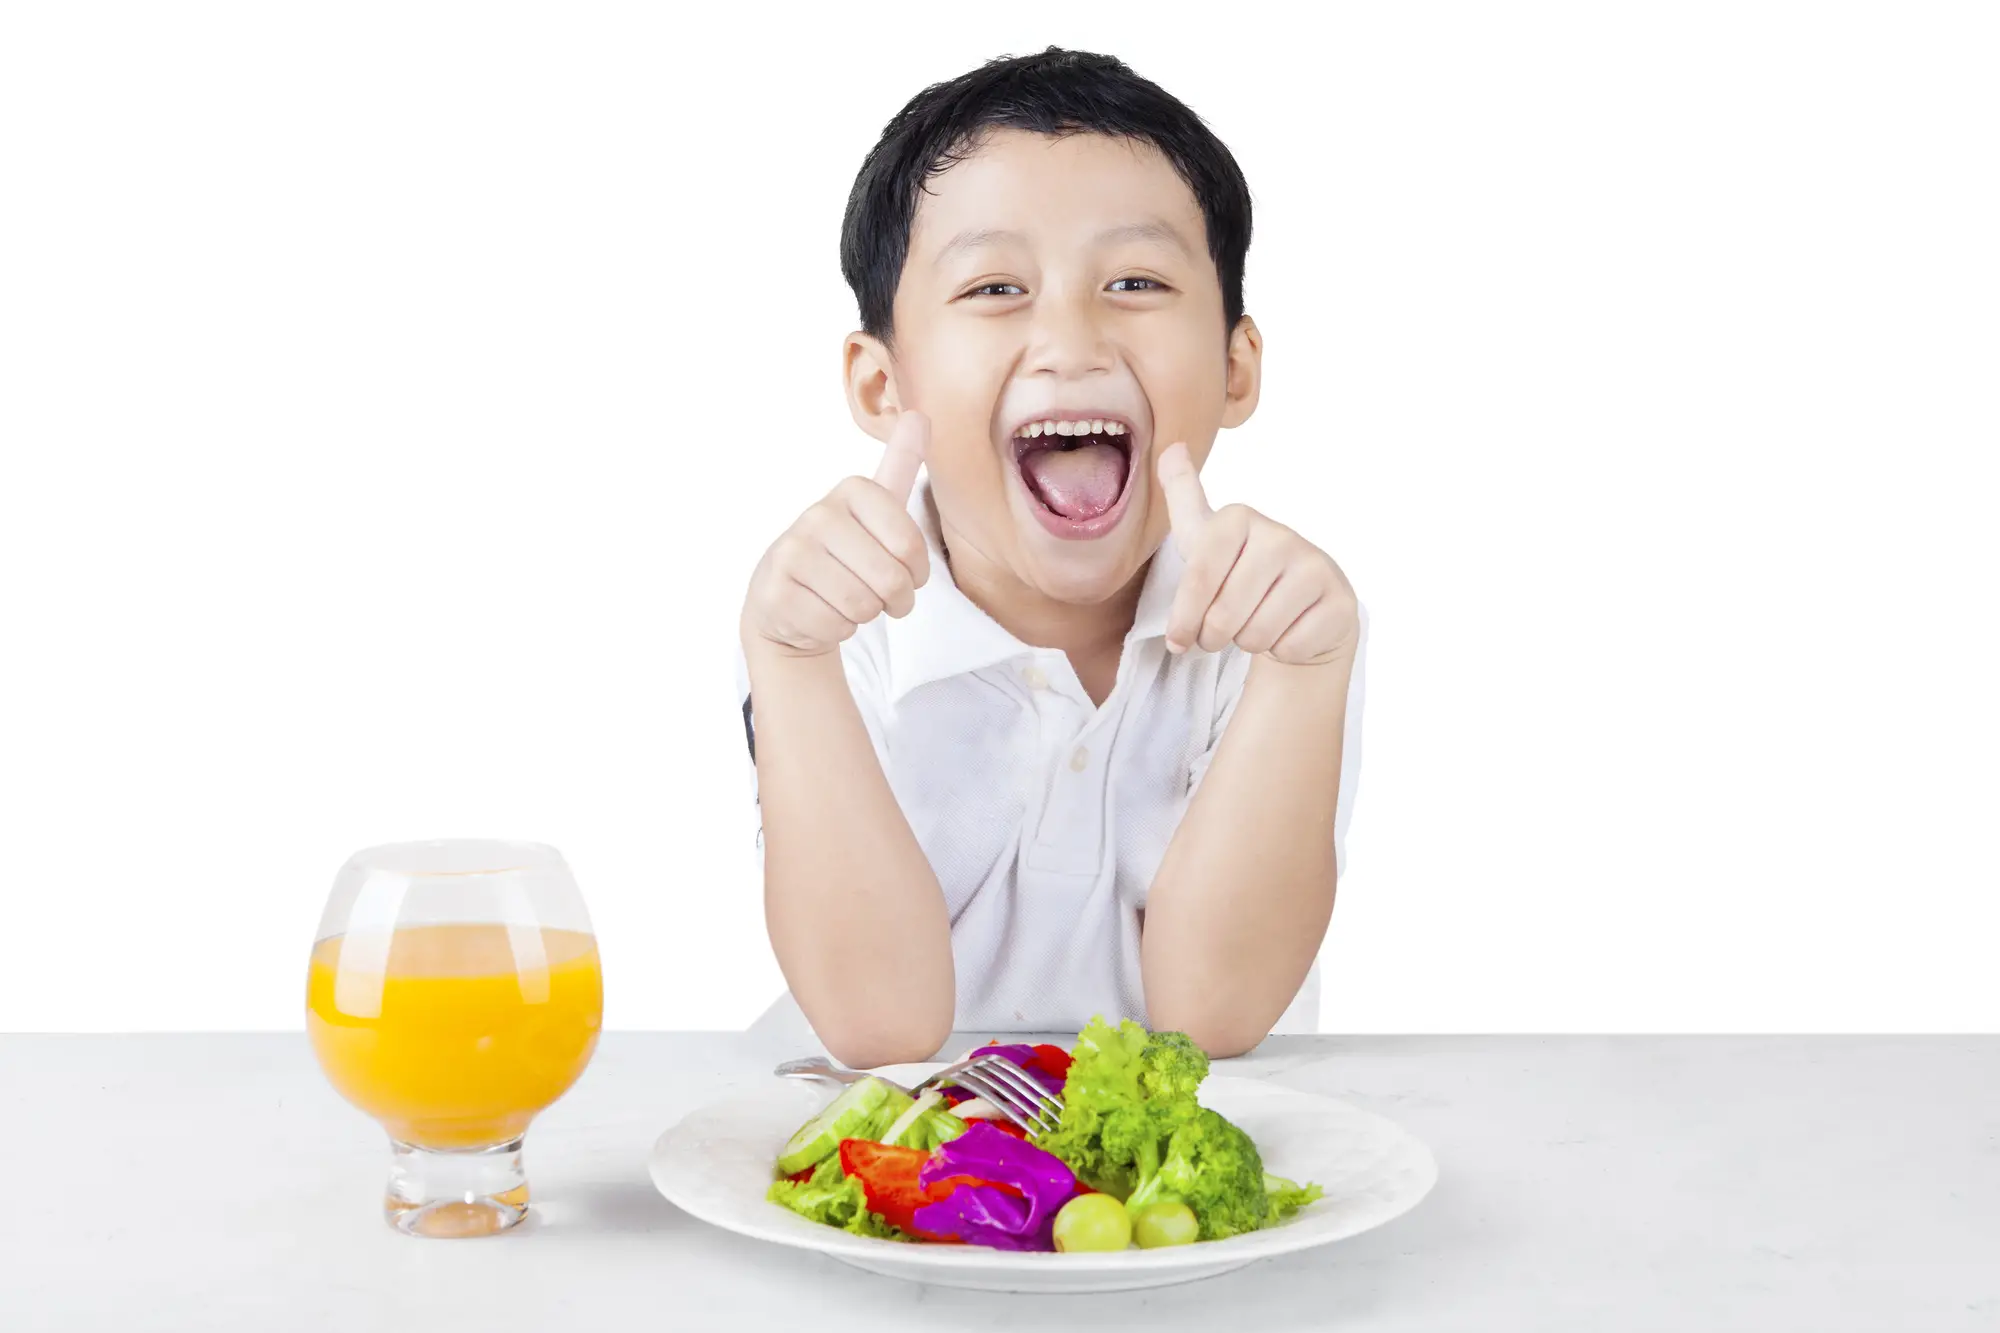 Cheerful toddler with healthy salad